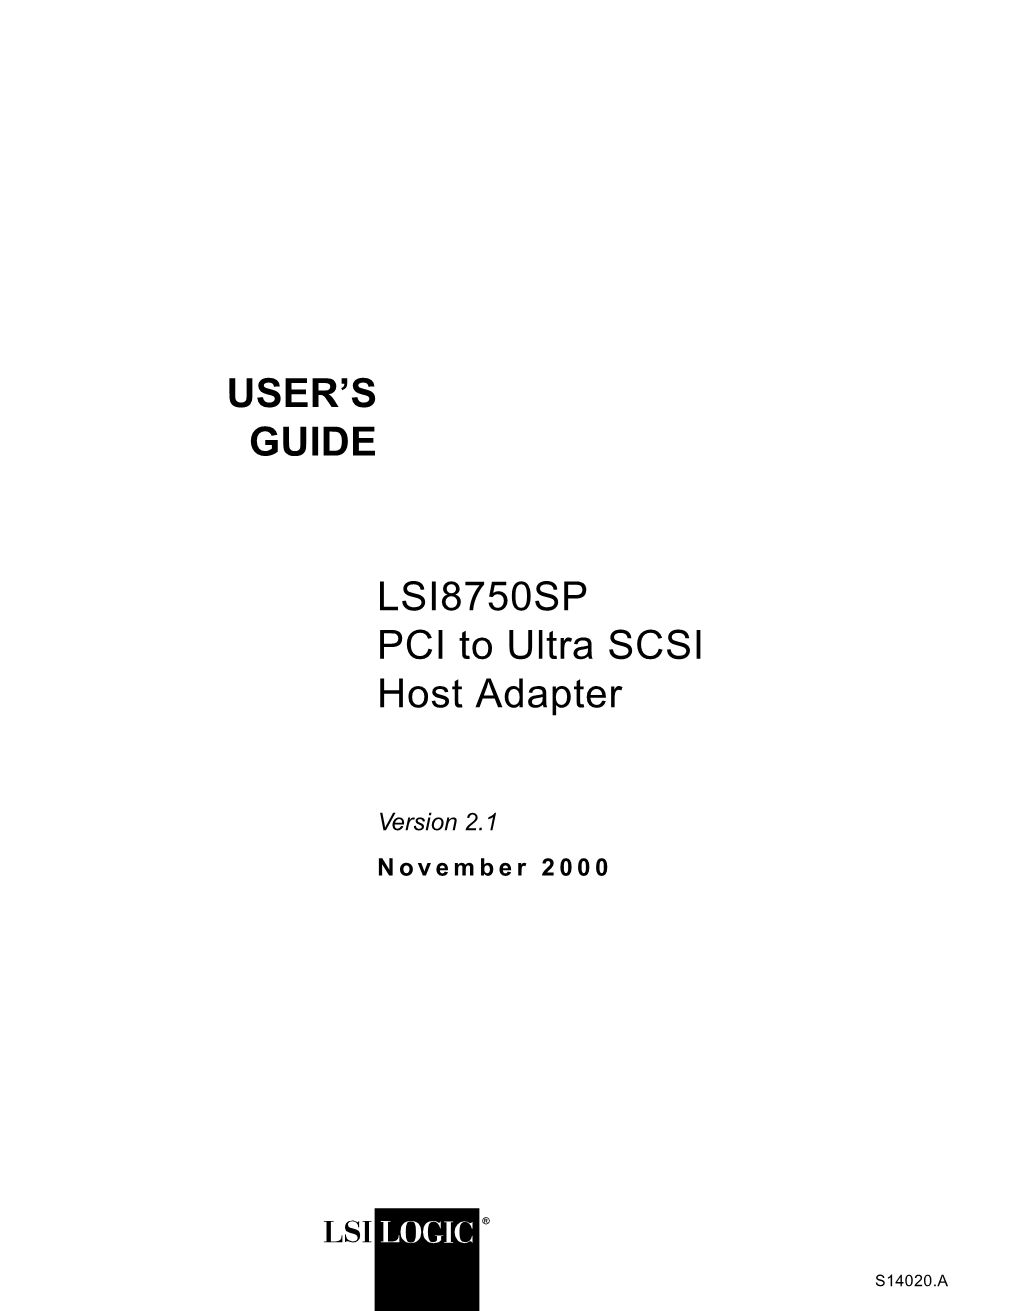 LSI8750SP PCI to Ultra SCSI Host Adapter User's Guide